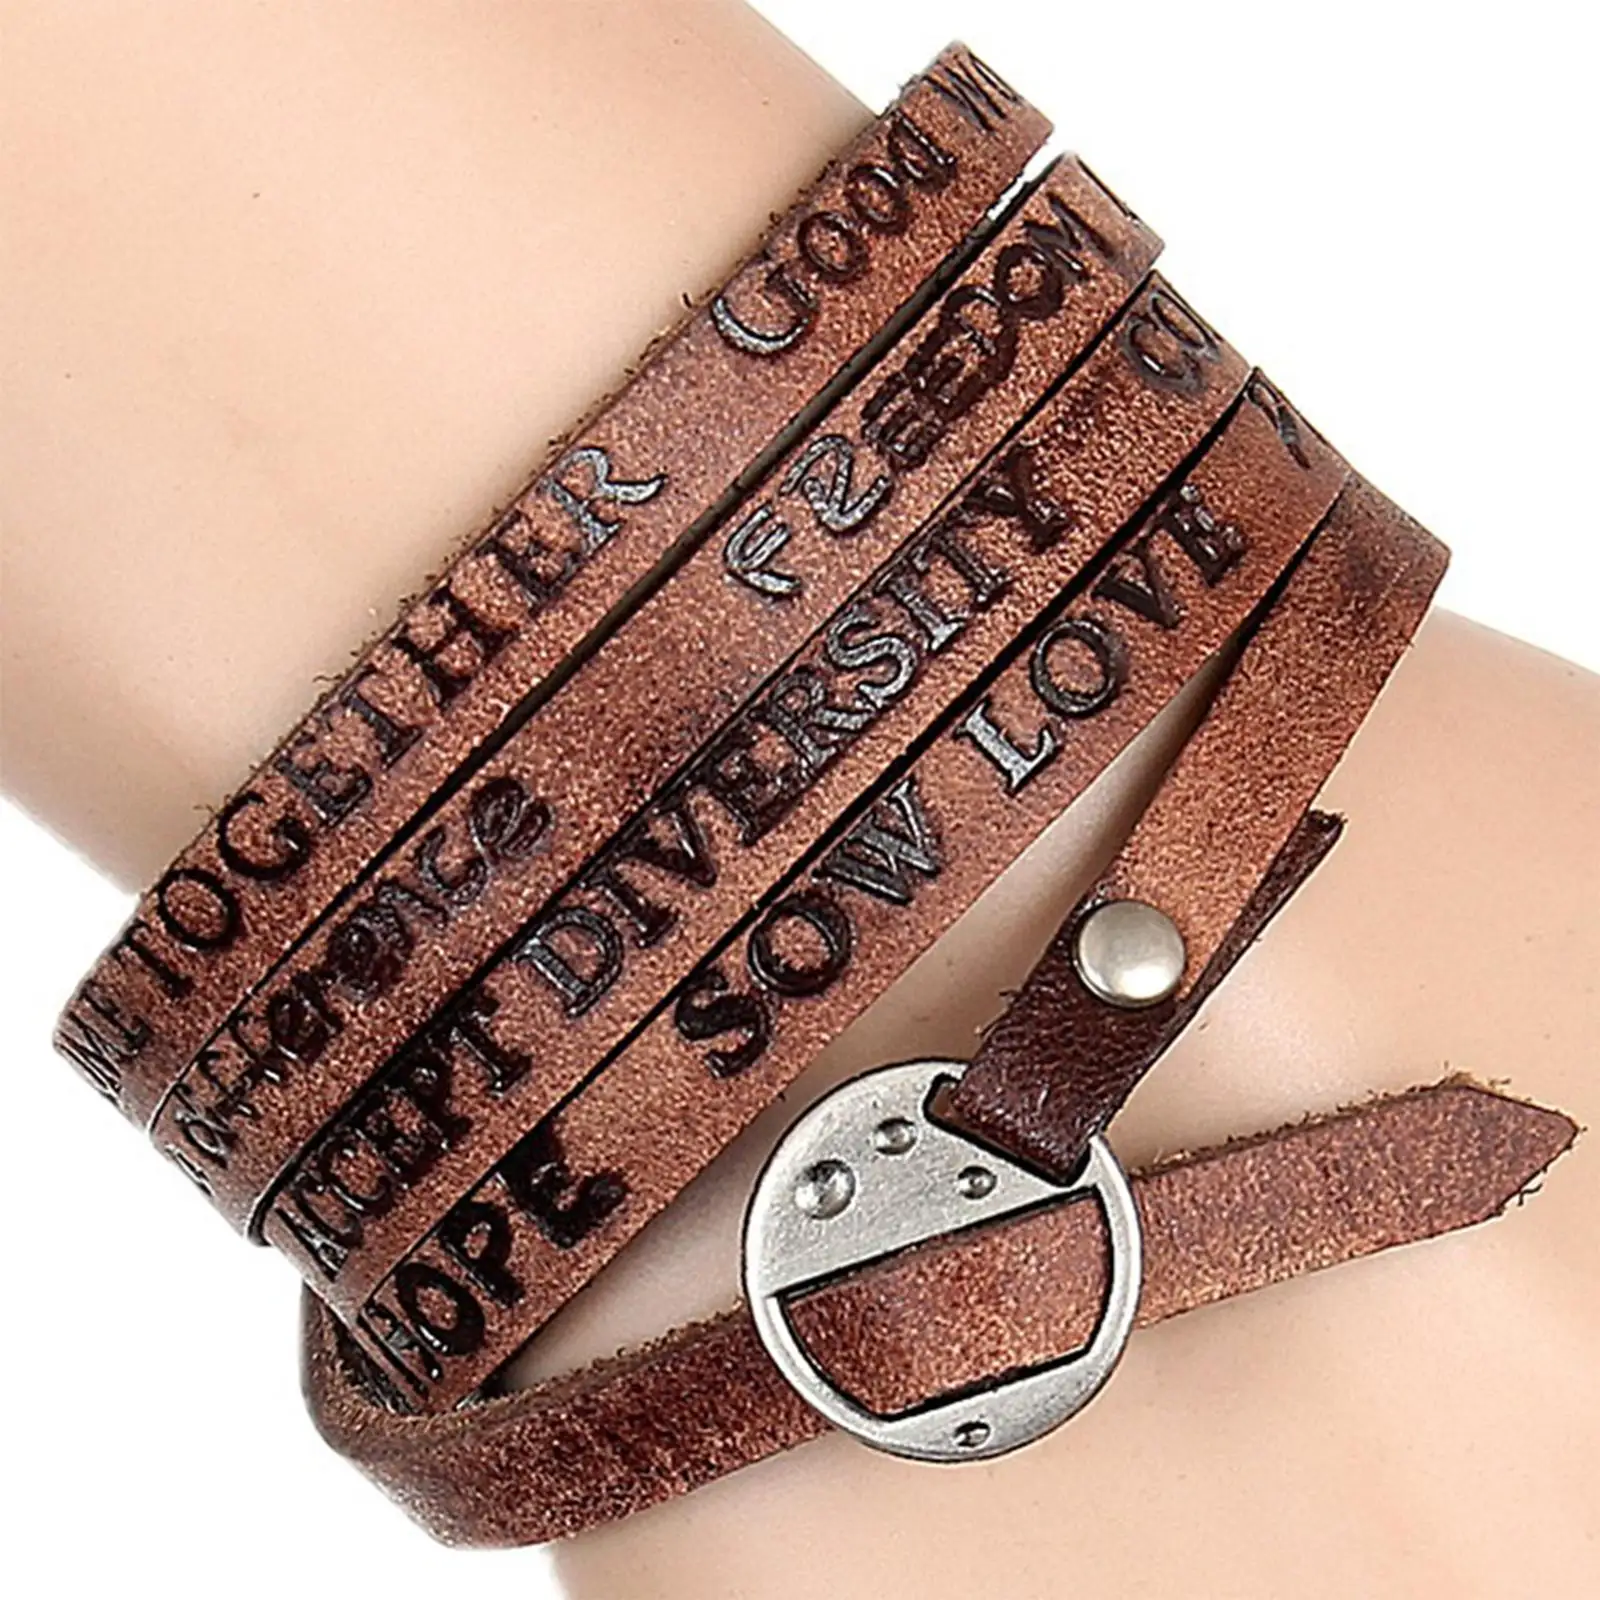 PU Leather Wide Bracelet Punk Cuff Bangles for Punk Clothing Father Boys